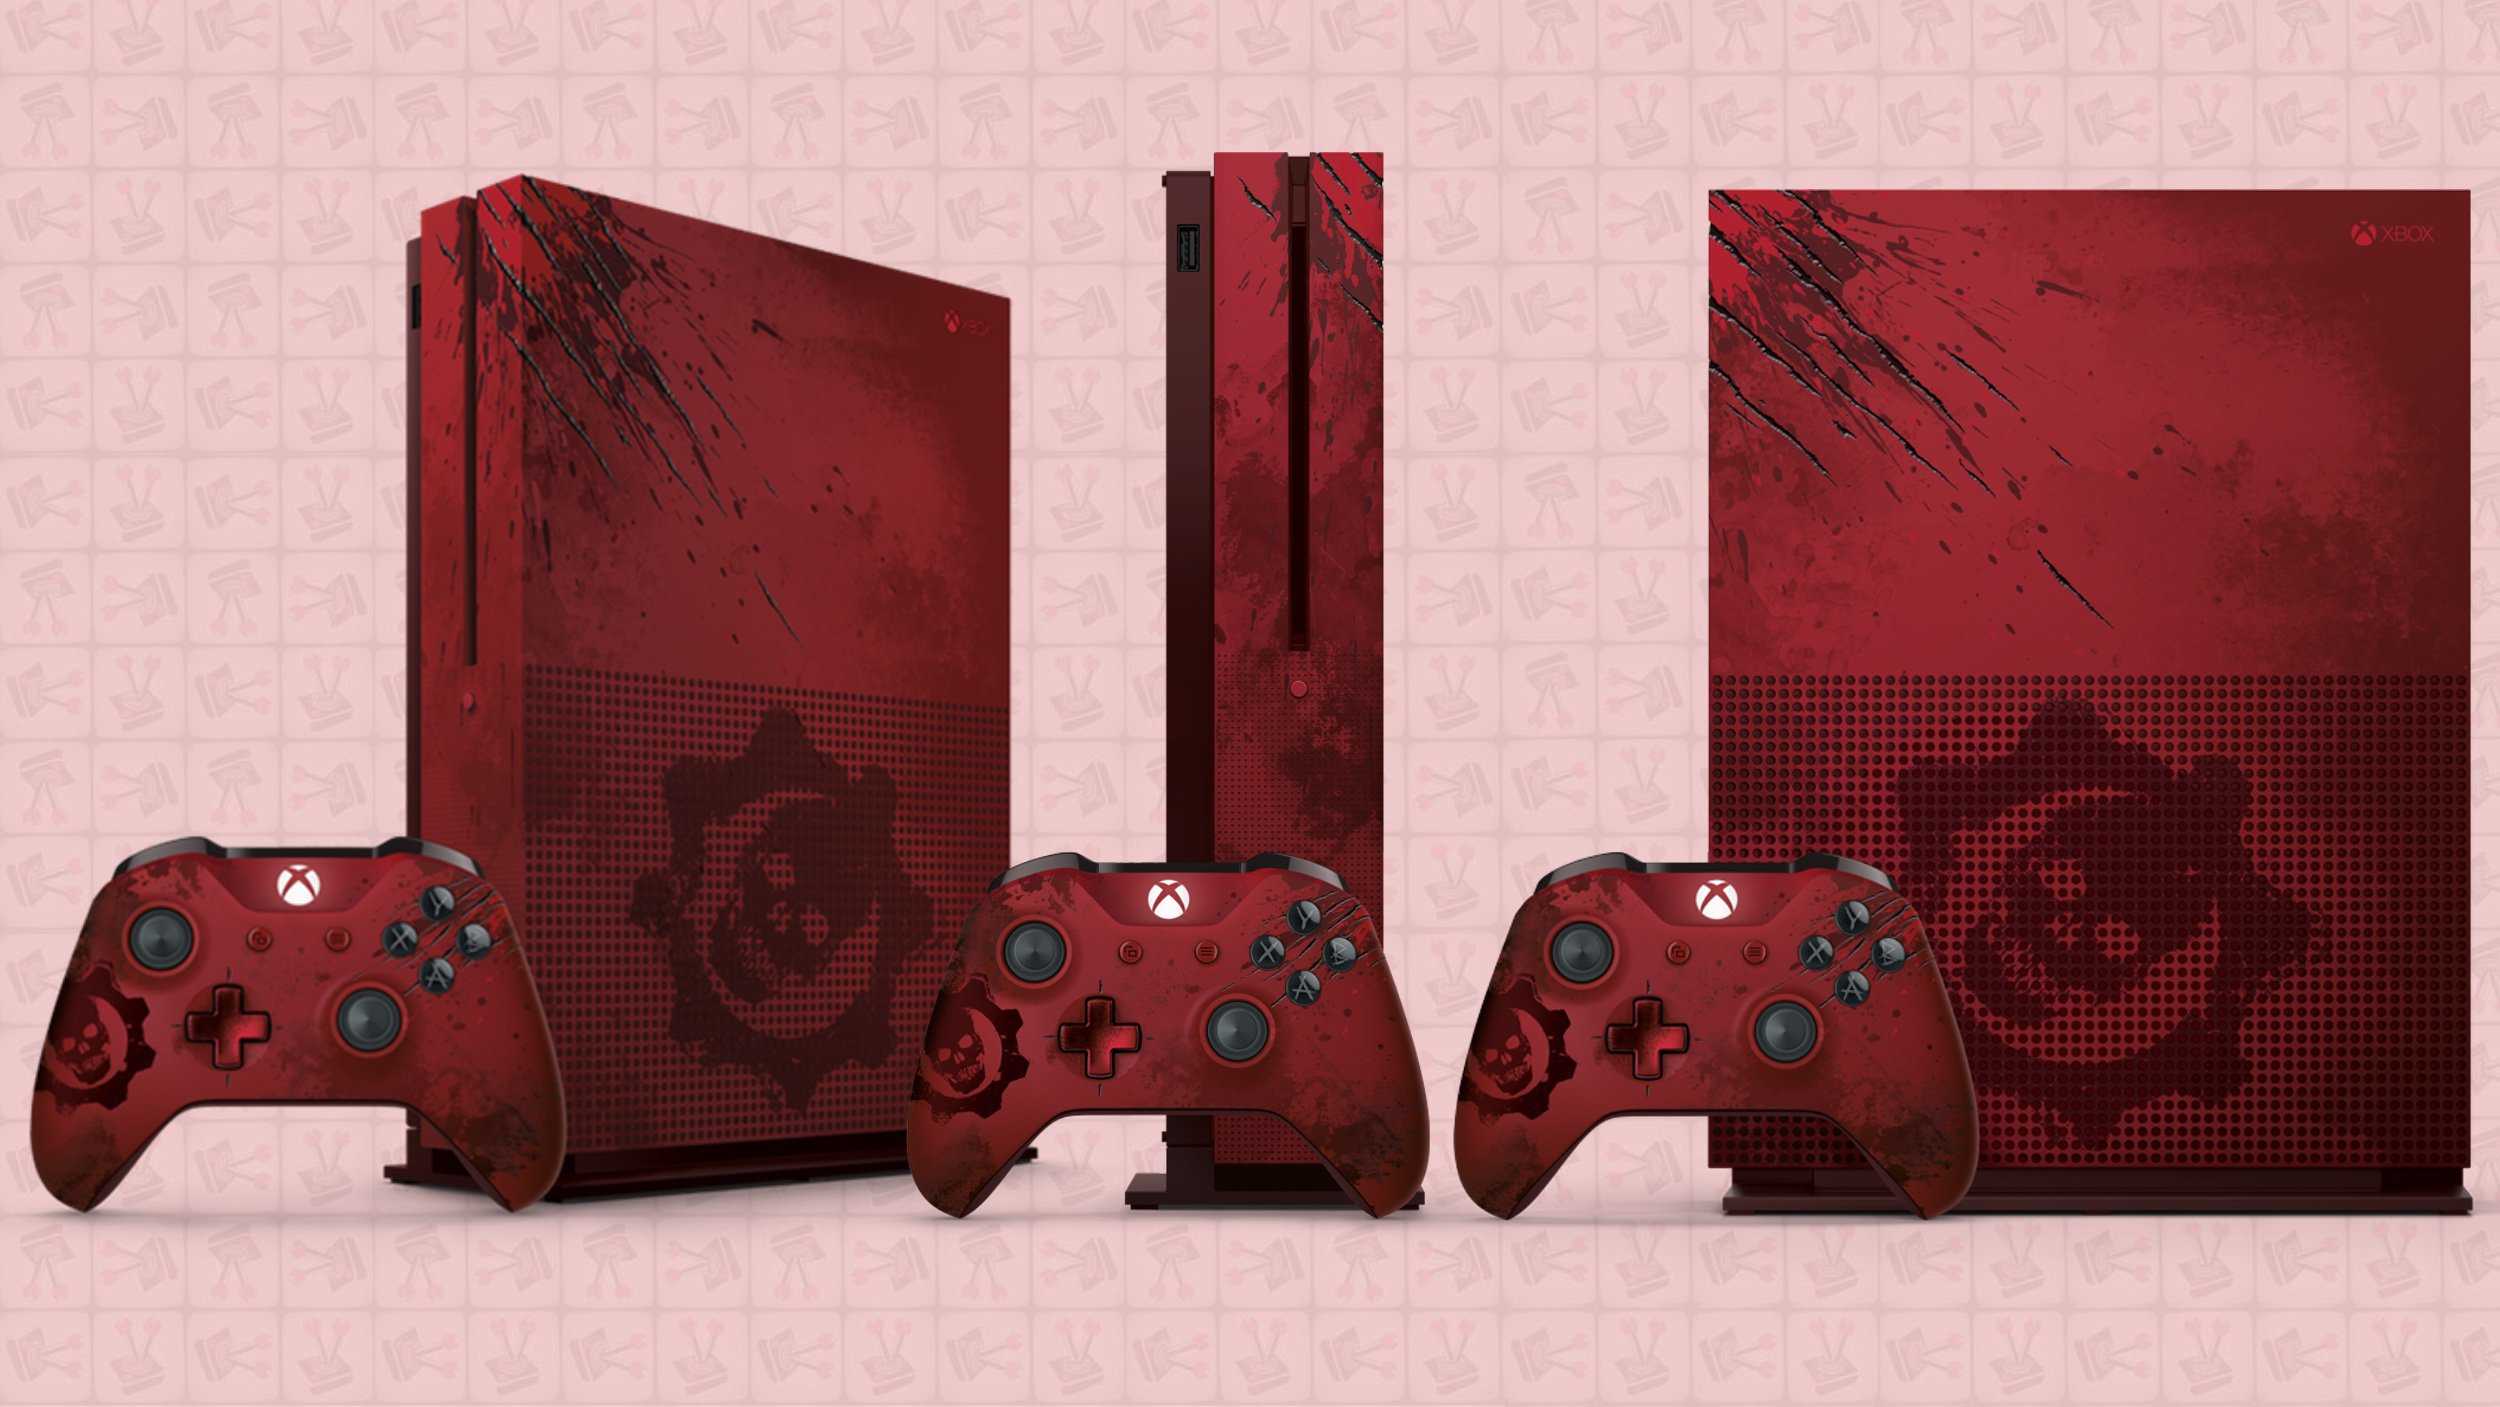 vamers-fyi-gaming-microsoft-is-releasing-a-gears-of-war-4-custom-xbox-one-s-console-02